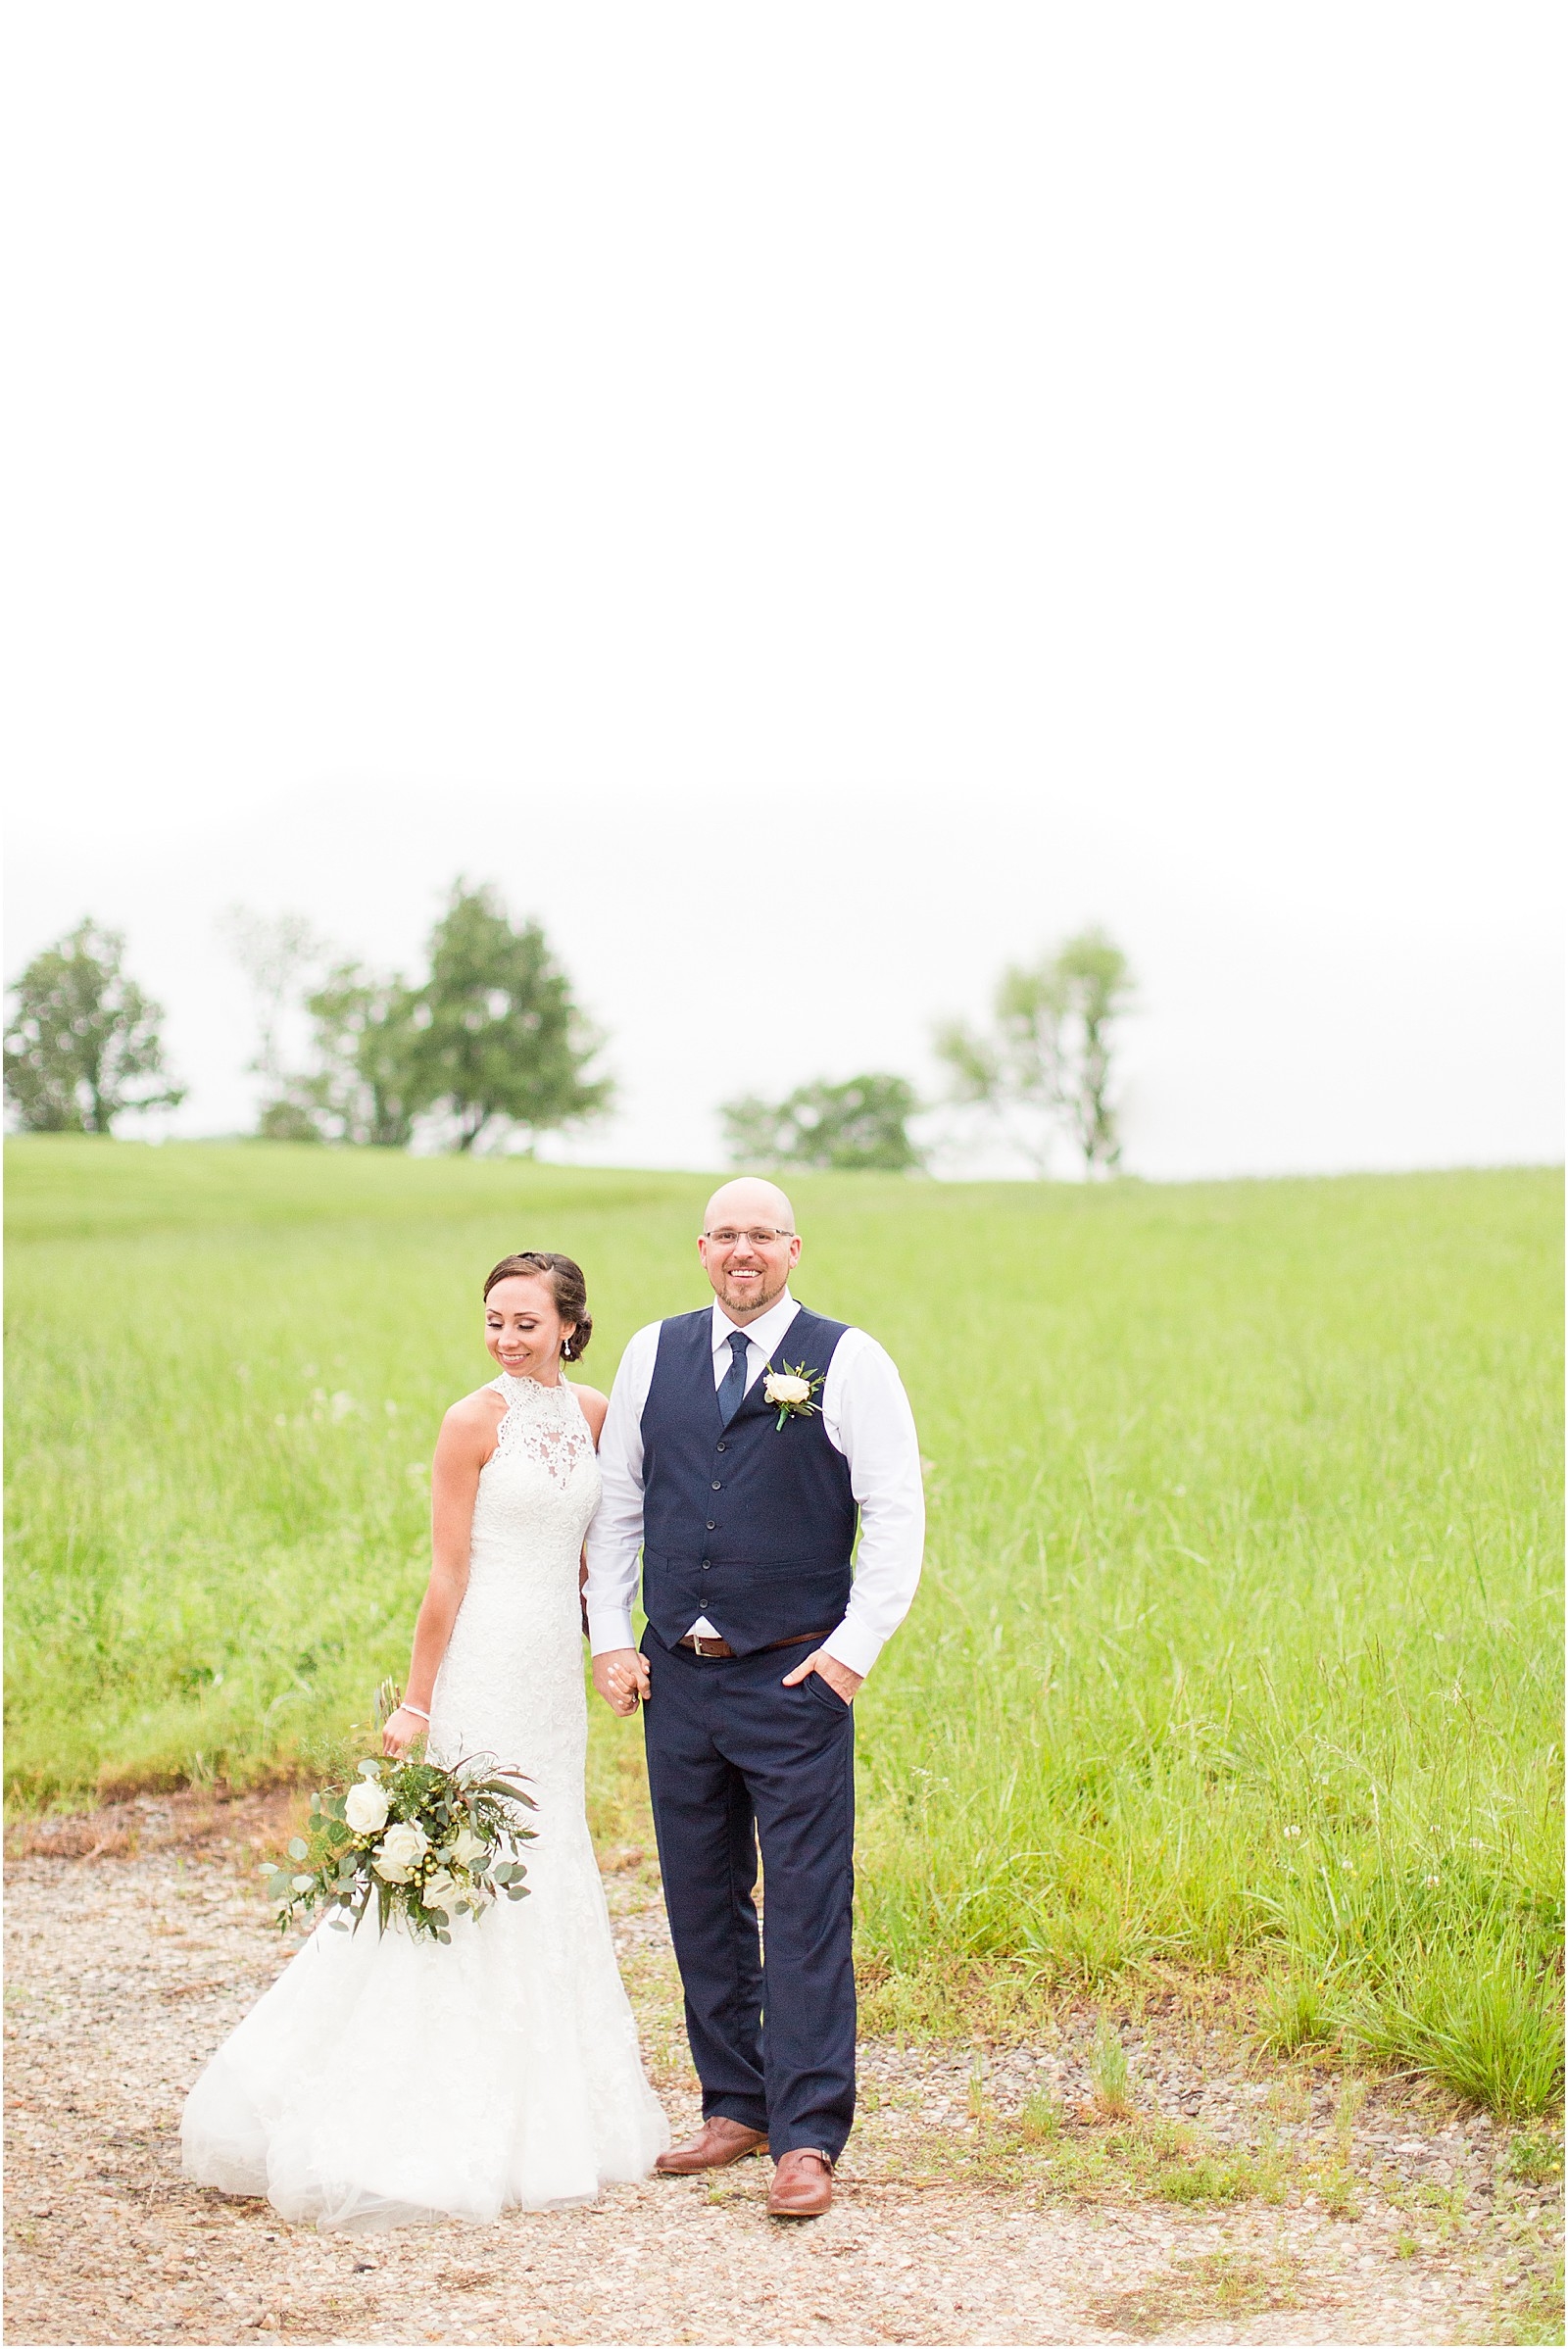 The Corner House Bed and Breakfast Wedding | Meagan and Michael129.jpg